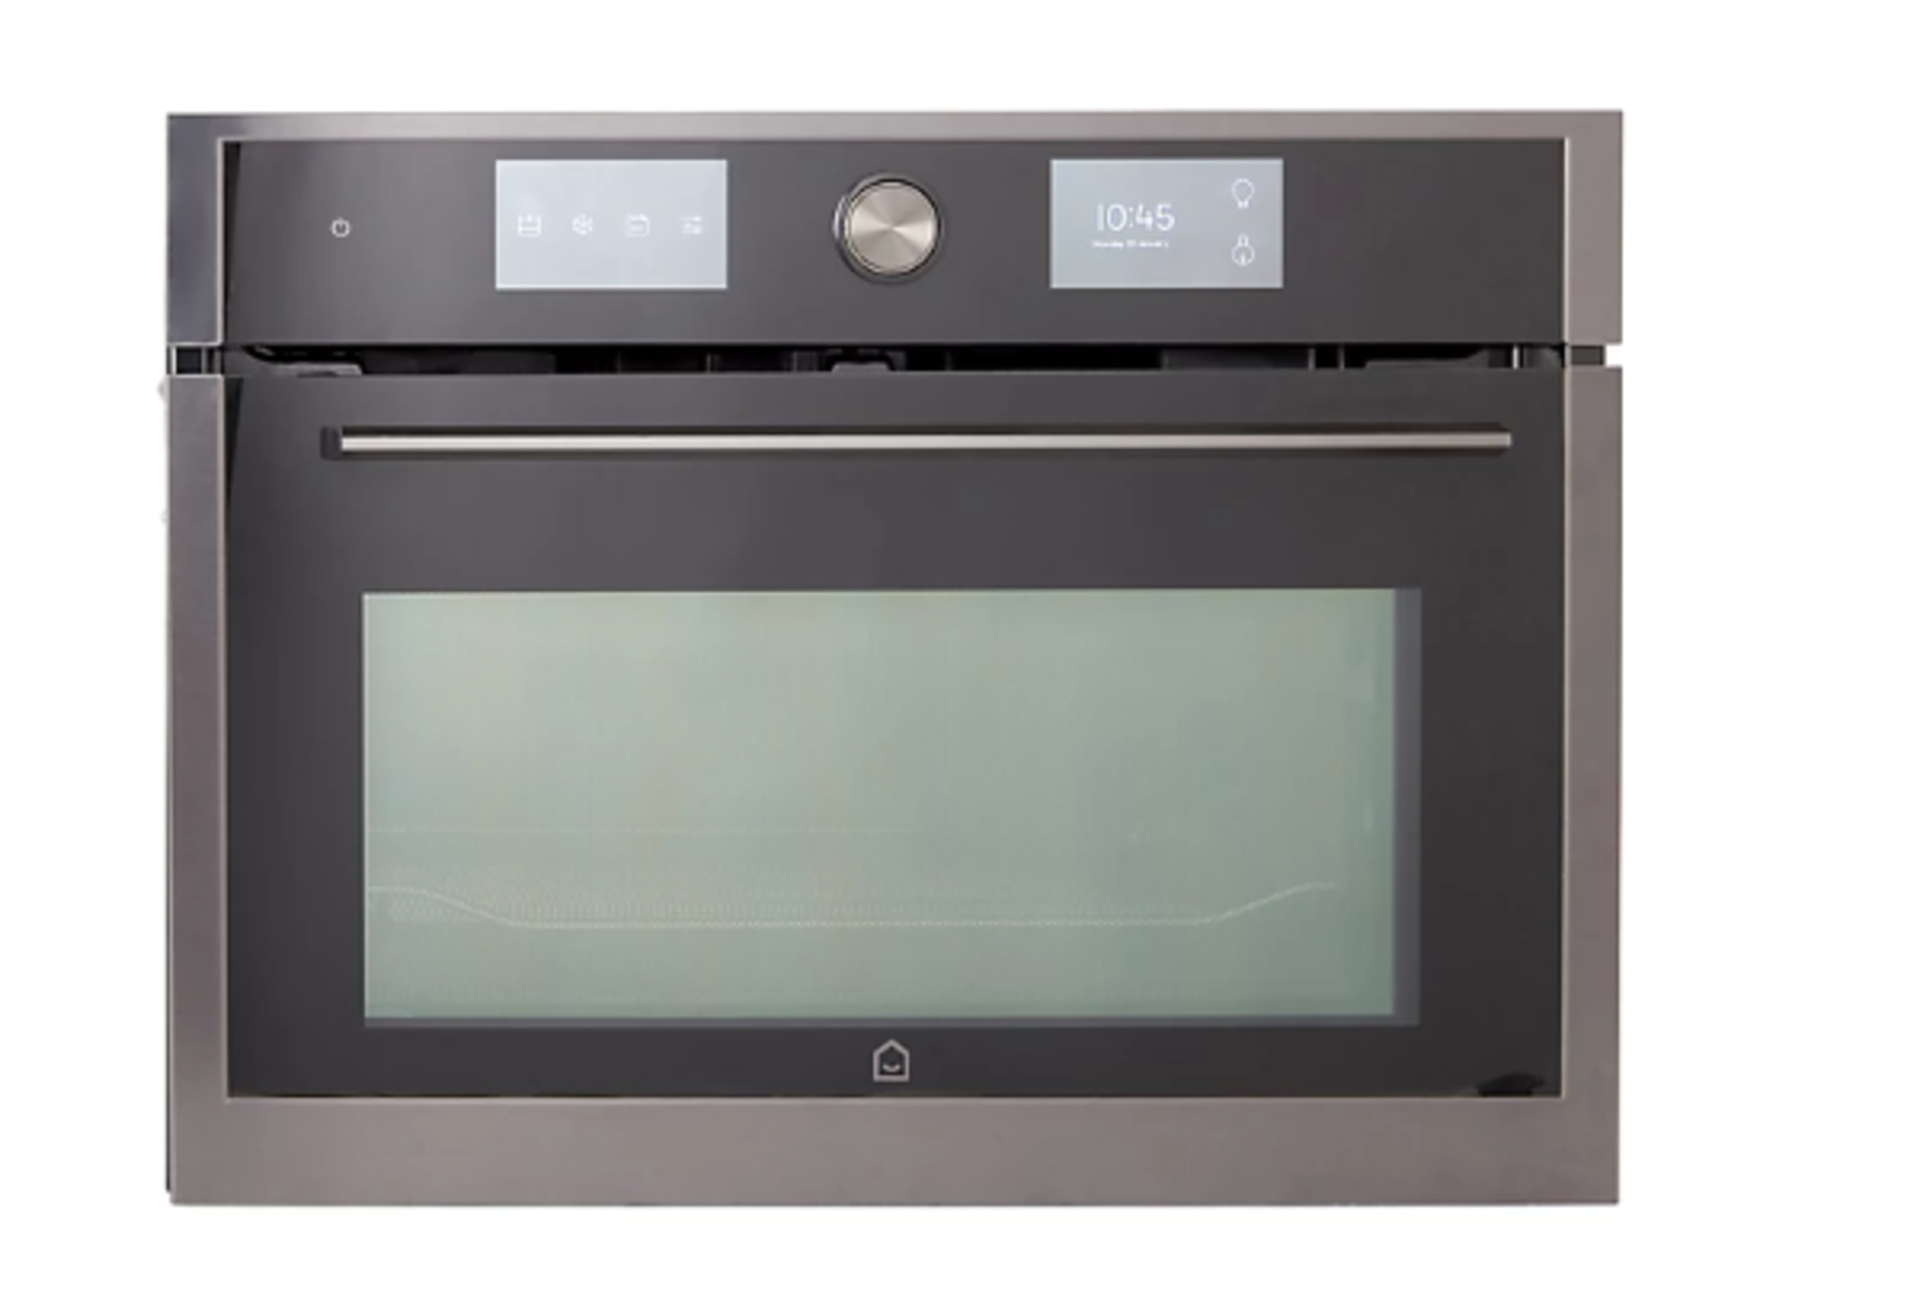 GoodHome GHCOM50 Built-in Compact Oven with microwave - Brushed black stainless steel effect. -